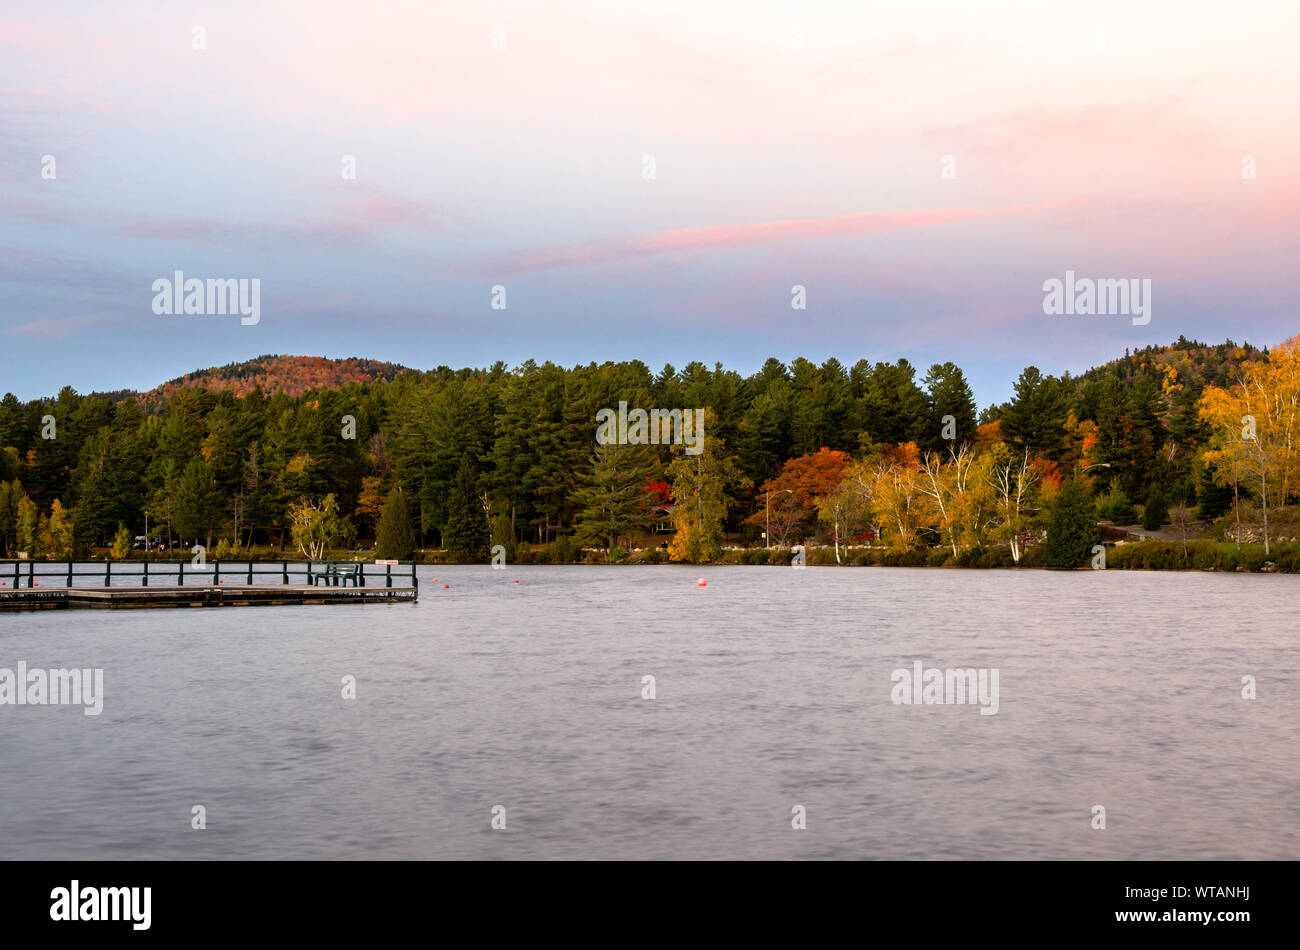 Lake surrounded by colourful autumn trees at twilight. A deserted wooden jetty is visible in foreground. Stock Photo